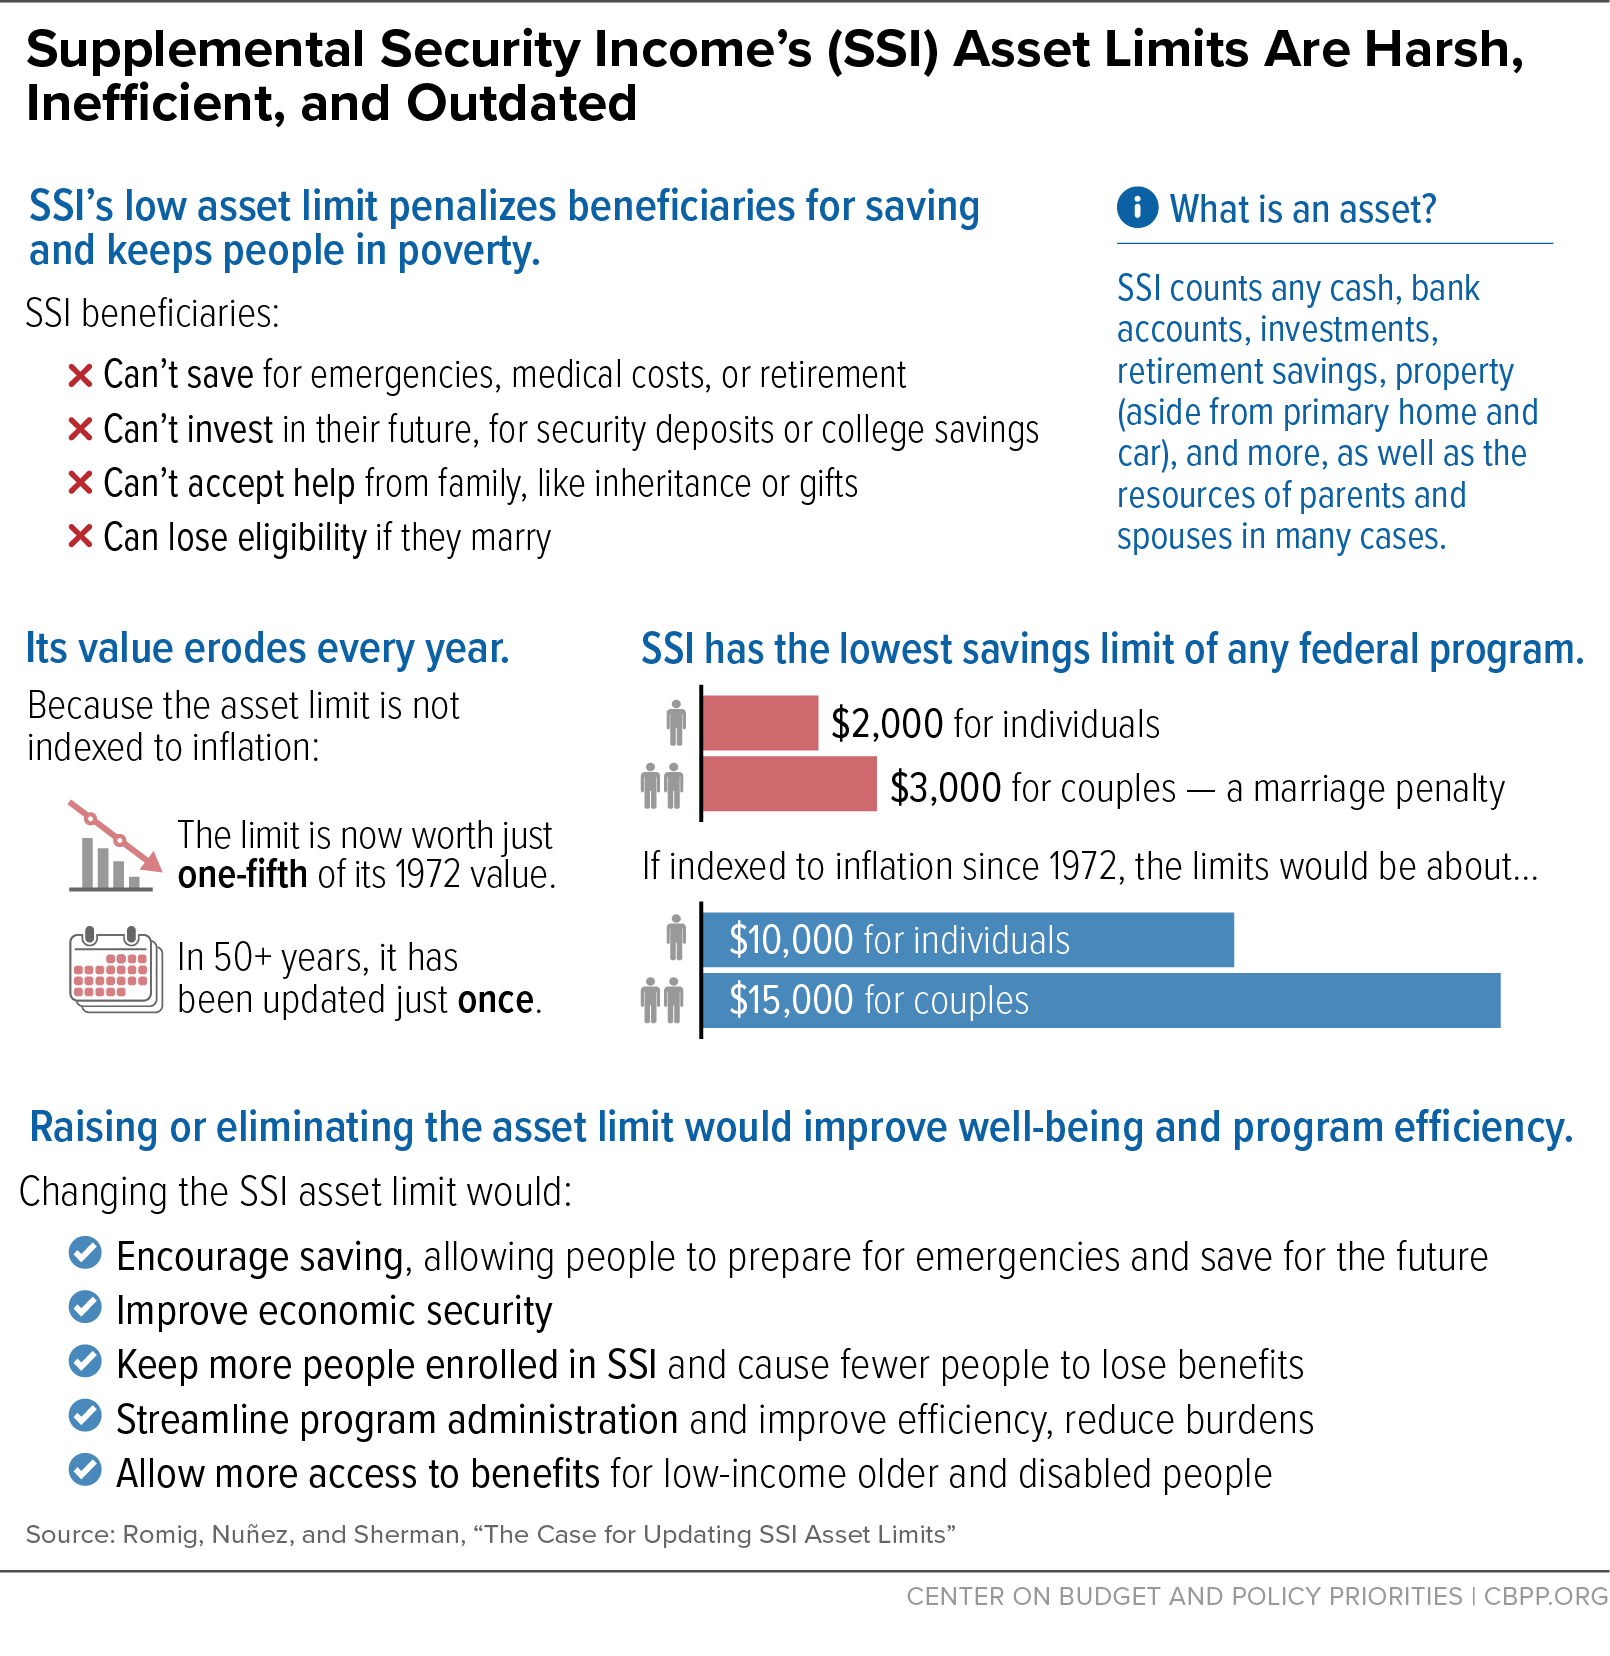 Supplemental Security Income's (SSI) Asset Limits Are Harsh, Inefficient, and Outdated